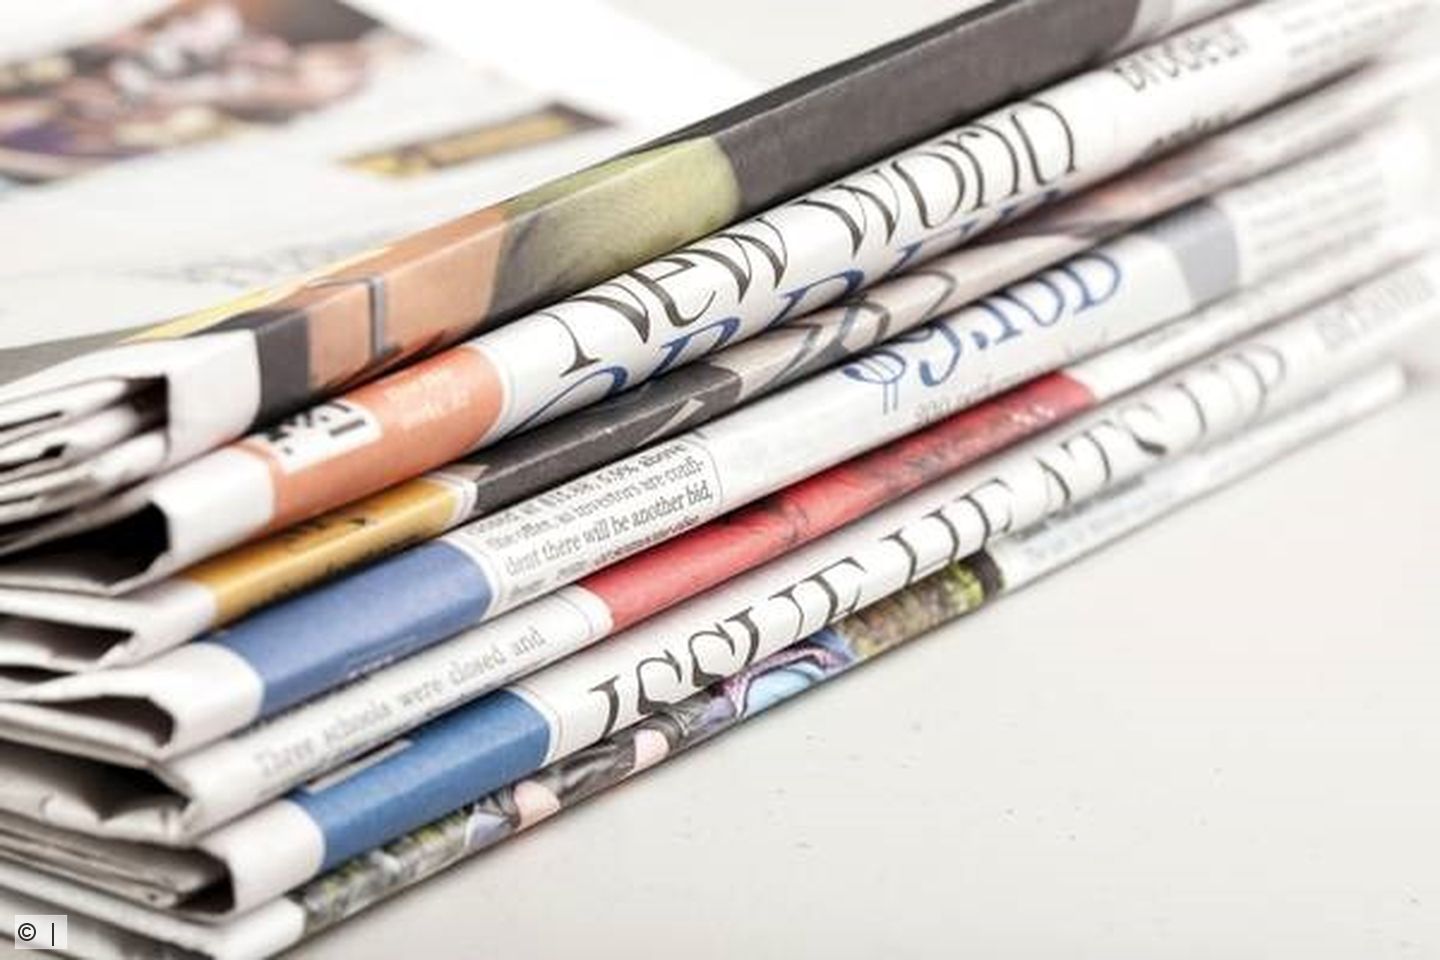 40 per cent of Resolute's newsprint capacities are down